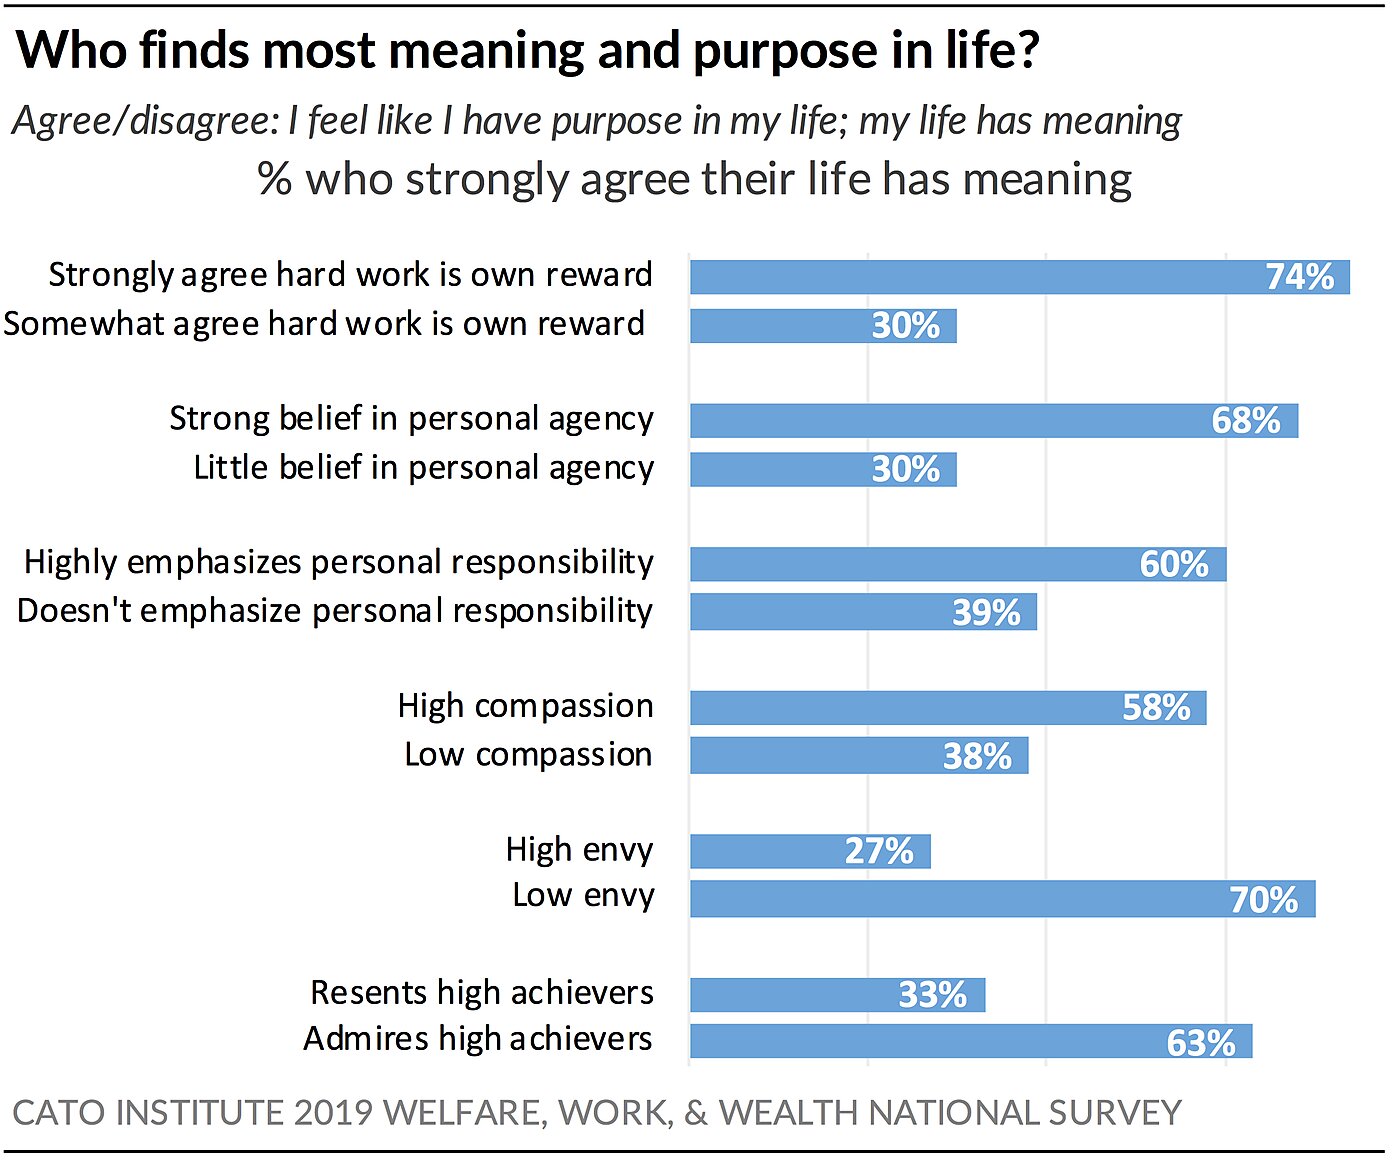 Who finds most meaning and purpose in life?